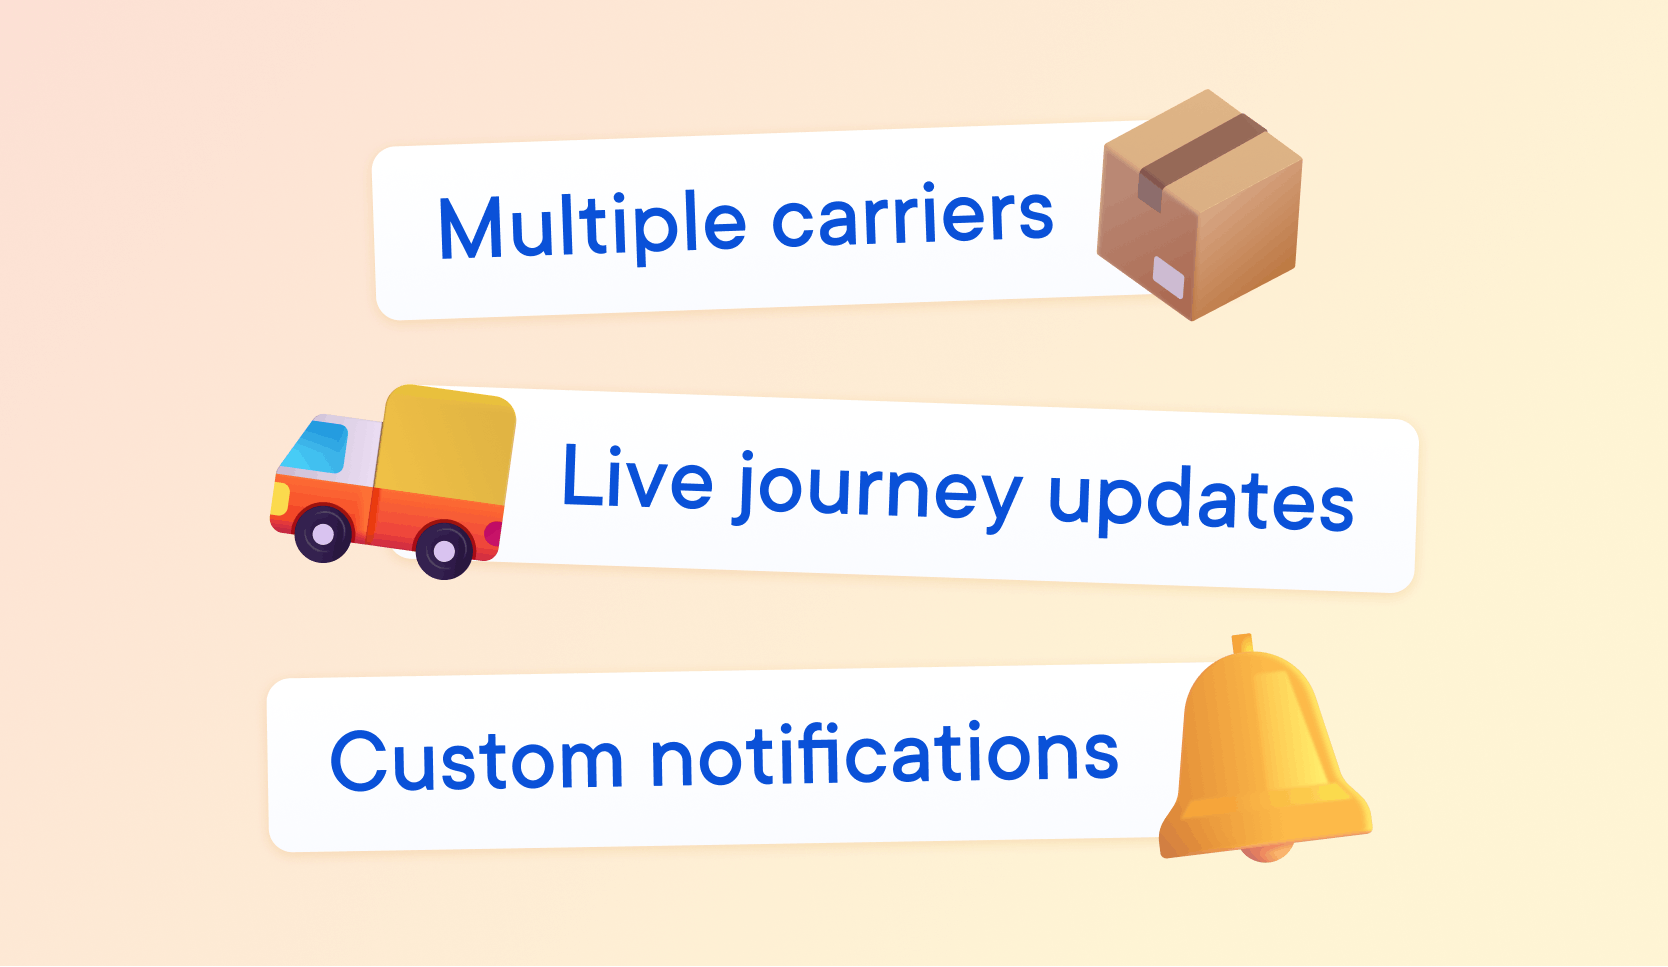 Three text cards with emojis which list the 3 basic features every good package tracking app should have. The first card at the top of the image says "Multiple carriers" with a delivery box emoji; the second card in the middle of the image says "Live journey updates" with a delivery van emoji. The third card at the bottom of the image says "Custom notifications" with an alarm bell emoji.